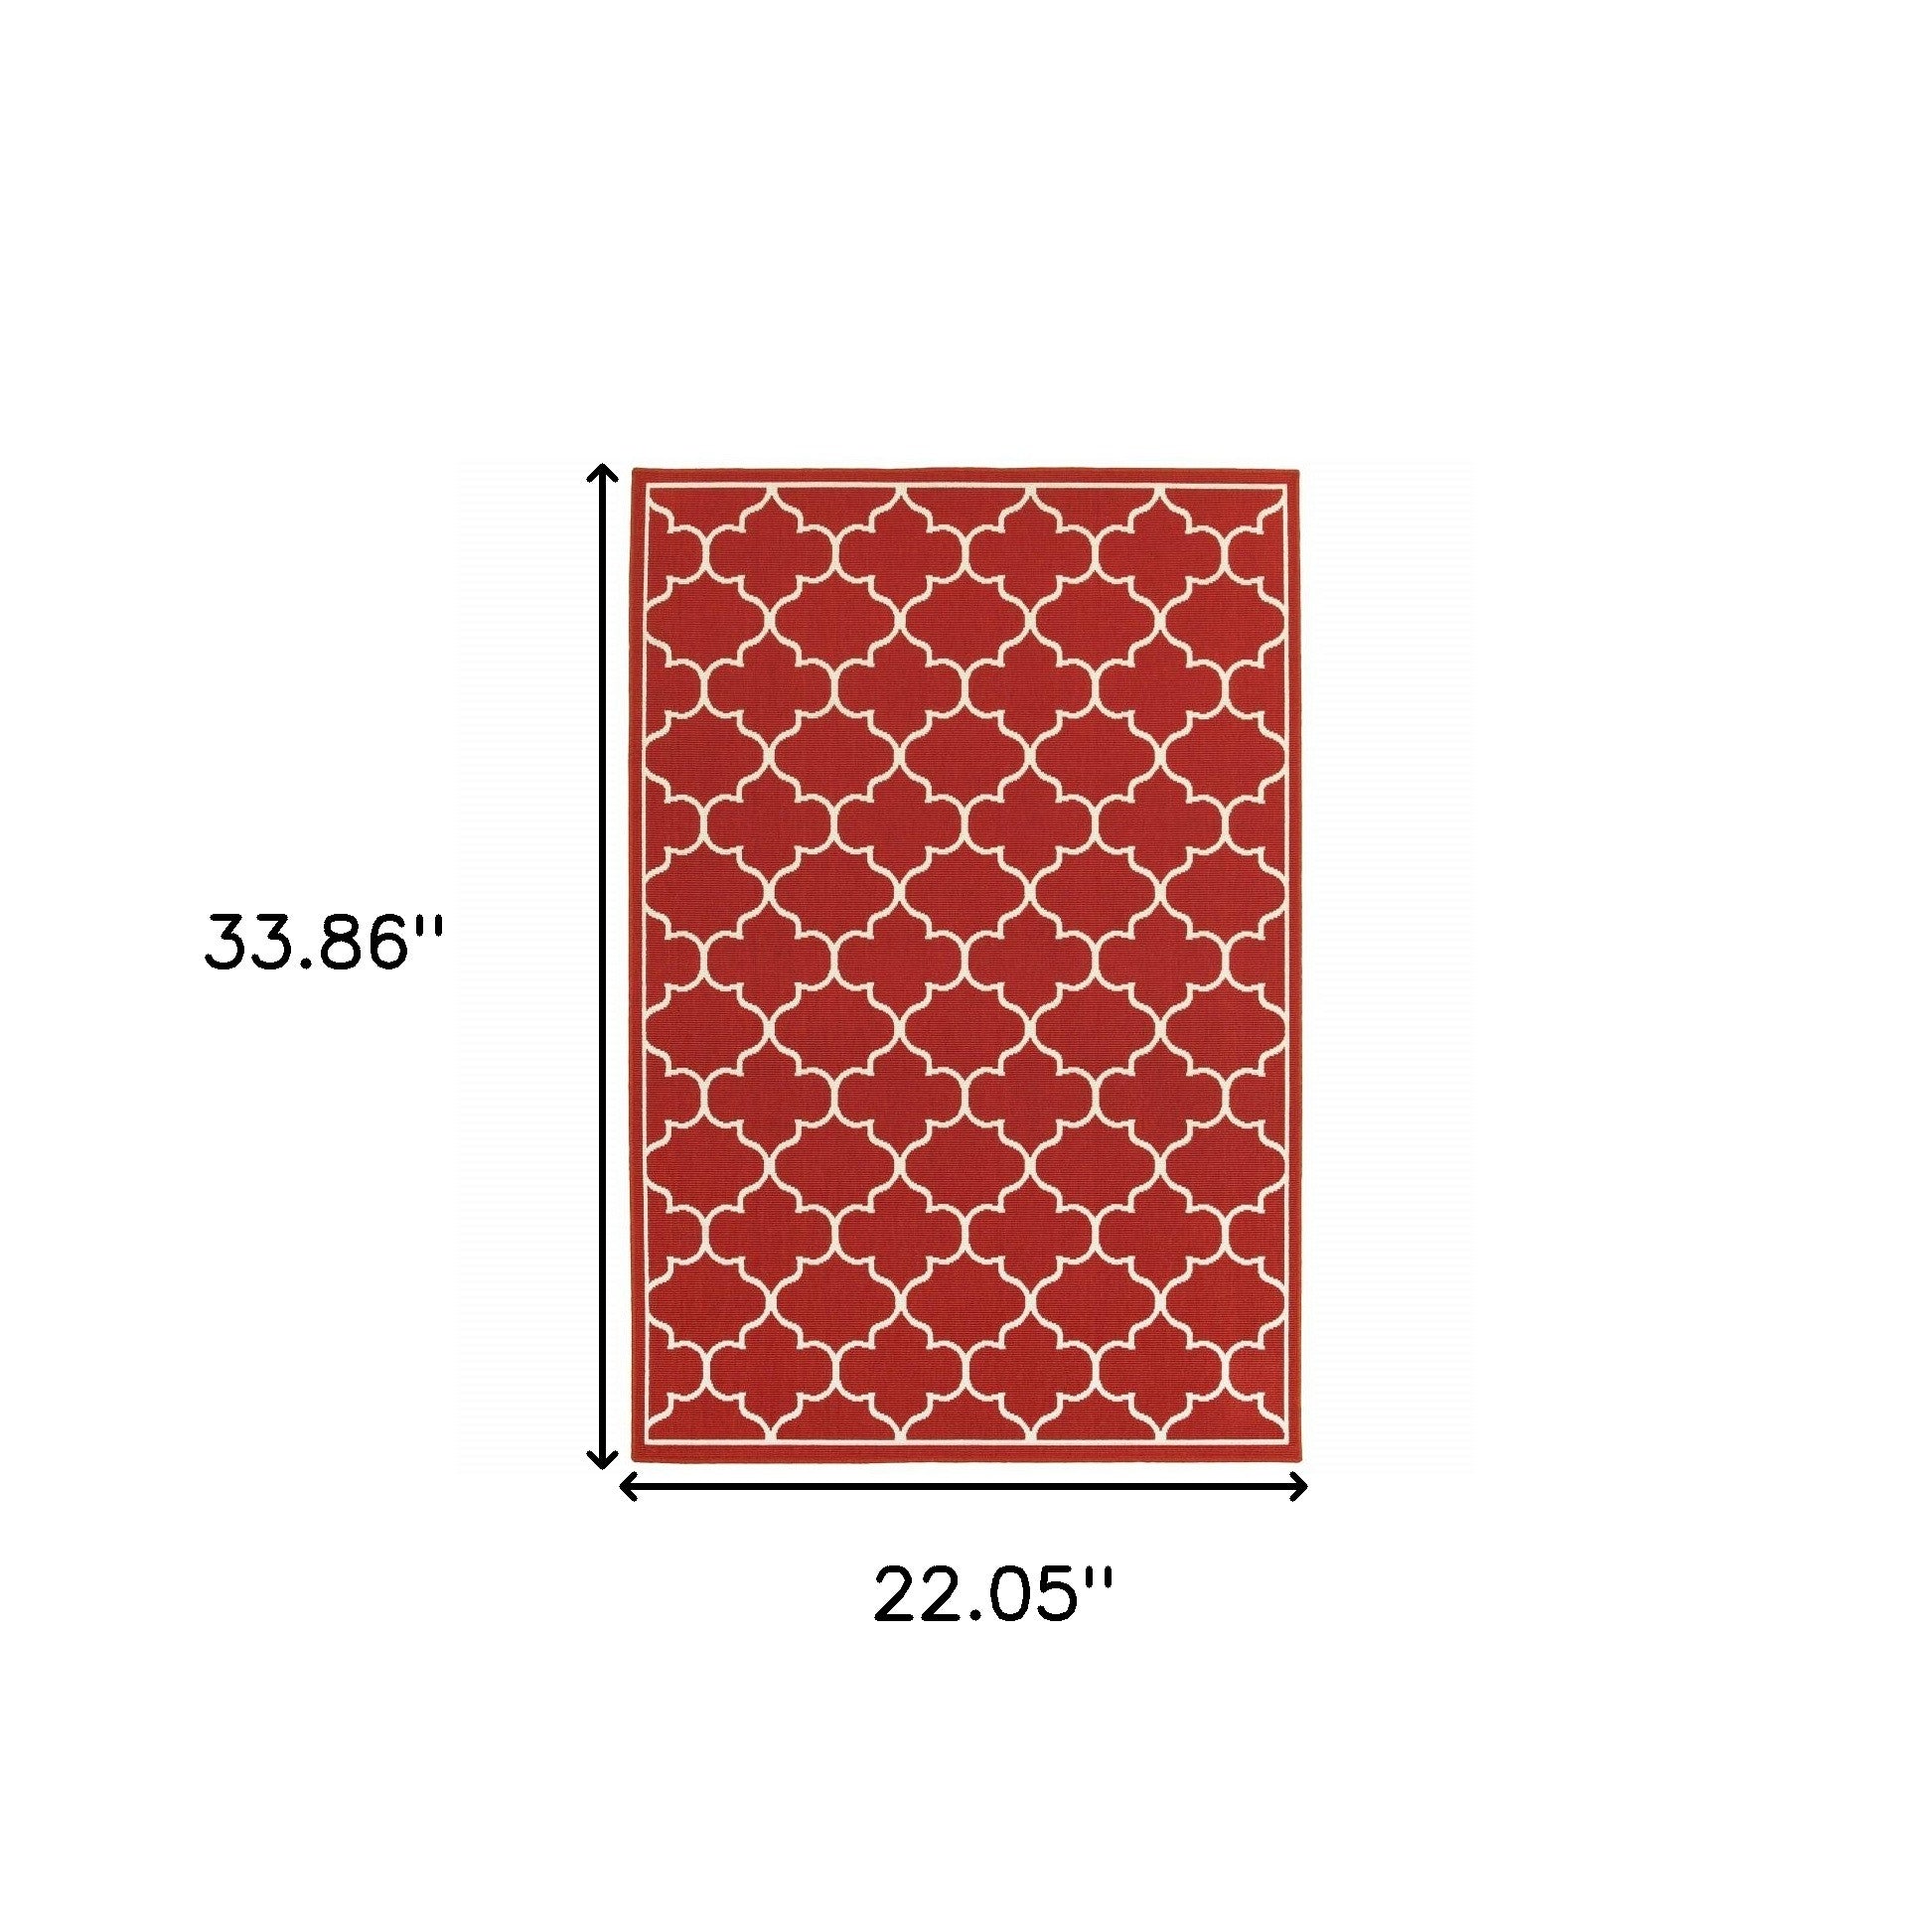 4' x 6' Red and Ivory Indoor Outdoor Area Rug